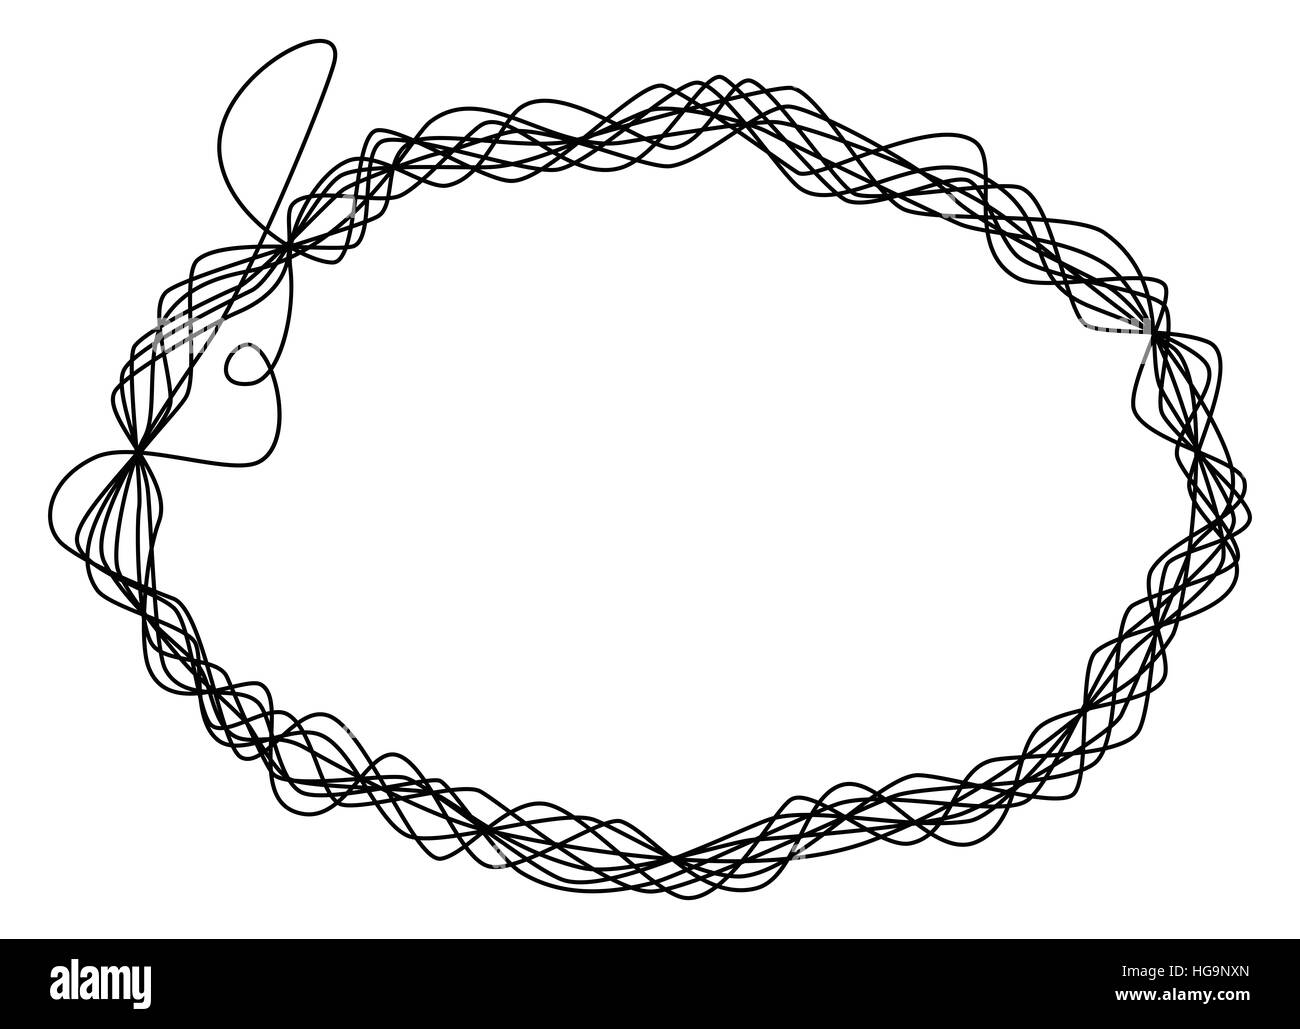 Single thread frame. One single line is eight times wrapped around and shaping an ellipse like a wire sculpture. Stock Photo